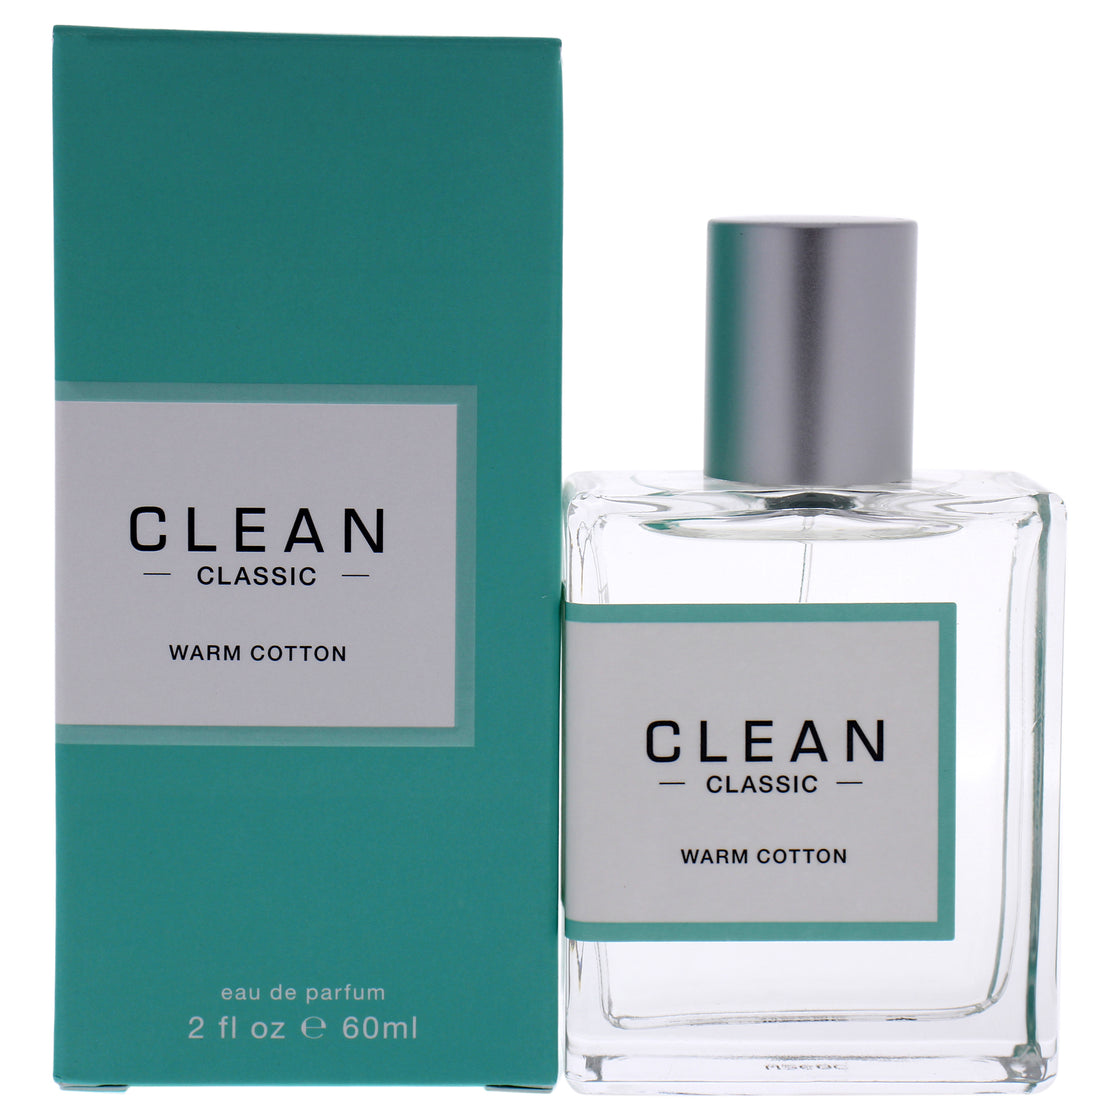 Classic Warm Cotton by Clean for Women - 2 oz EDP Spray